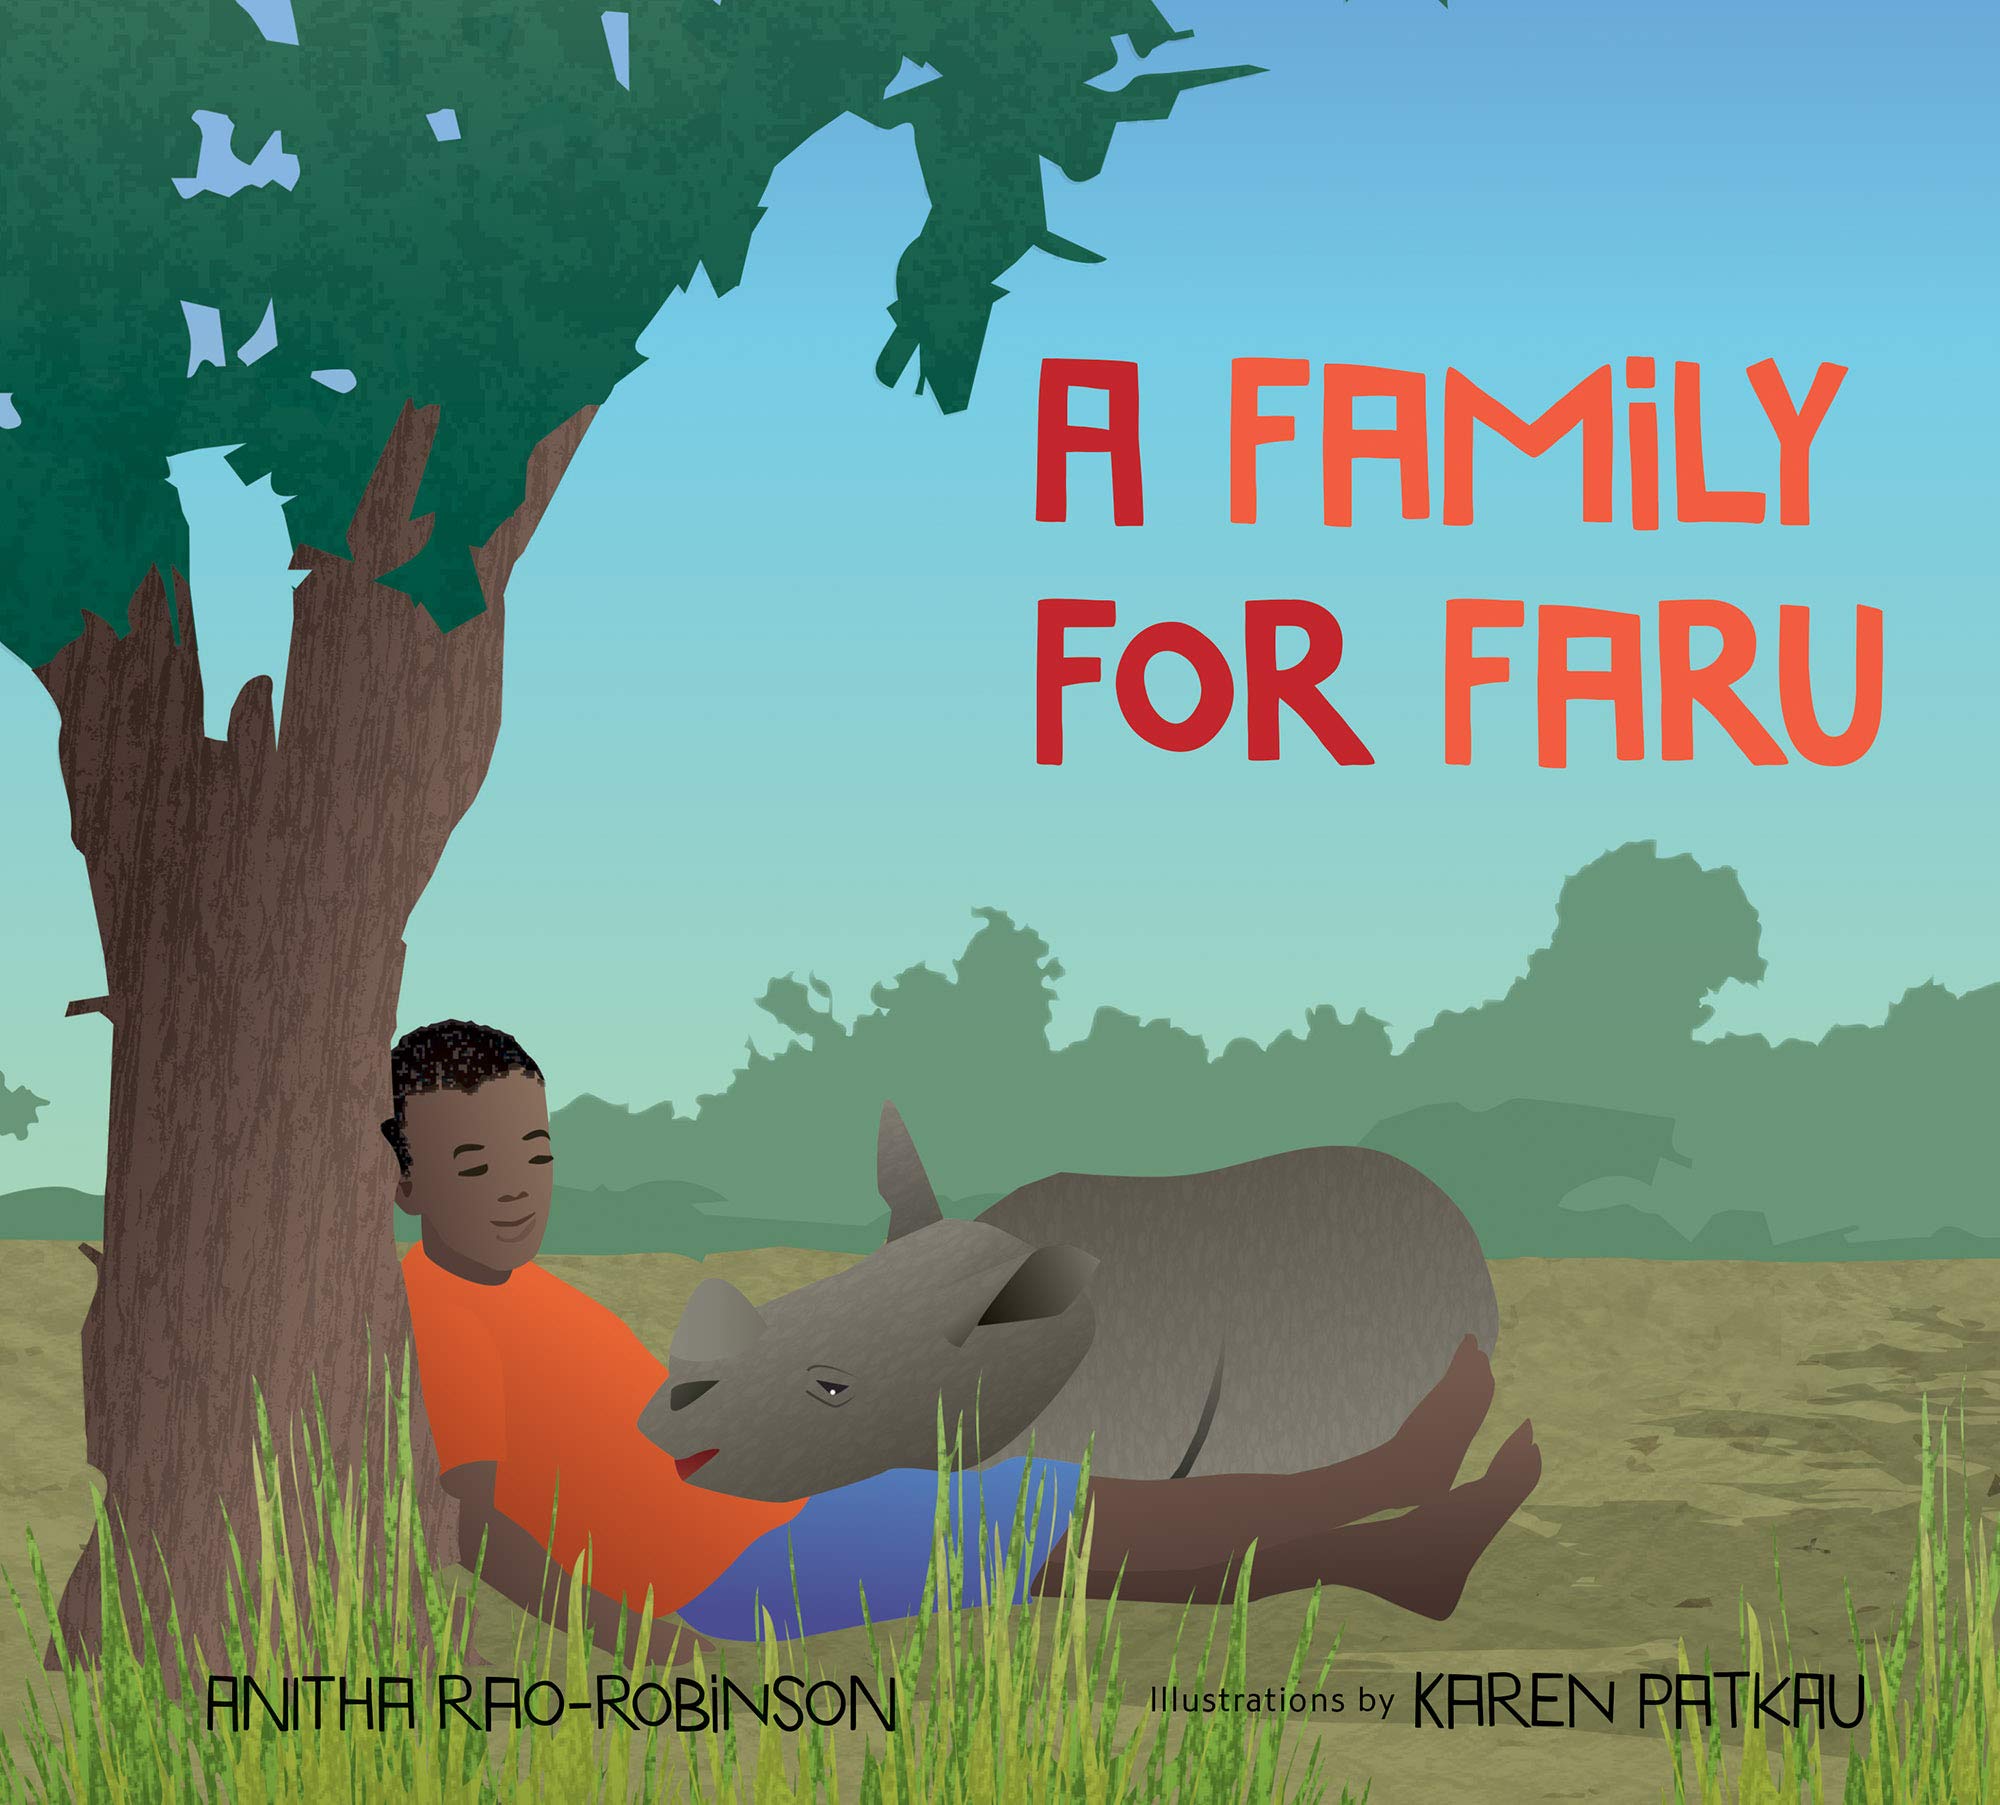 Cover of the book "A Family for Faru." Features main character leaned against a tree with Faru the rhino.